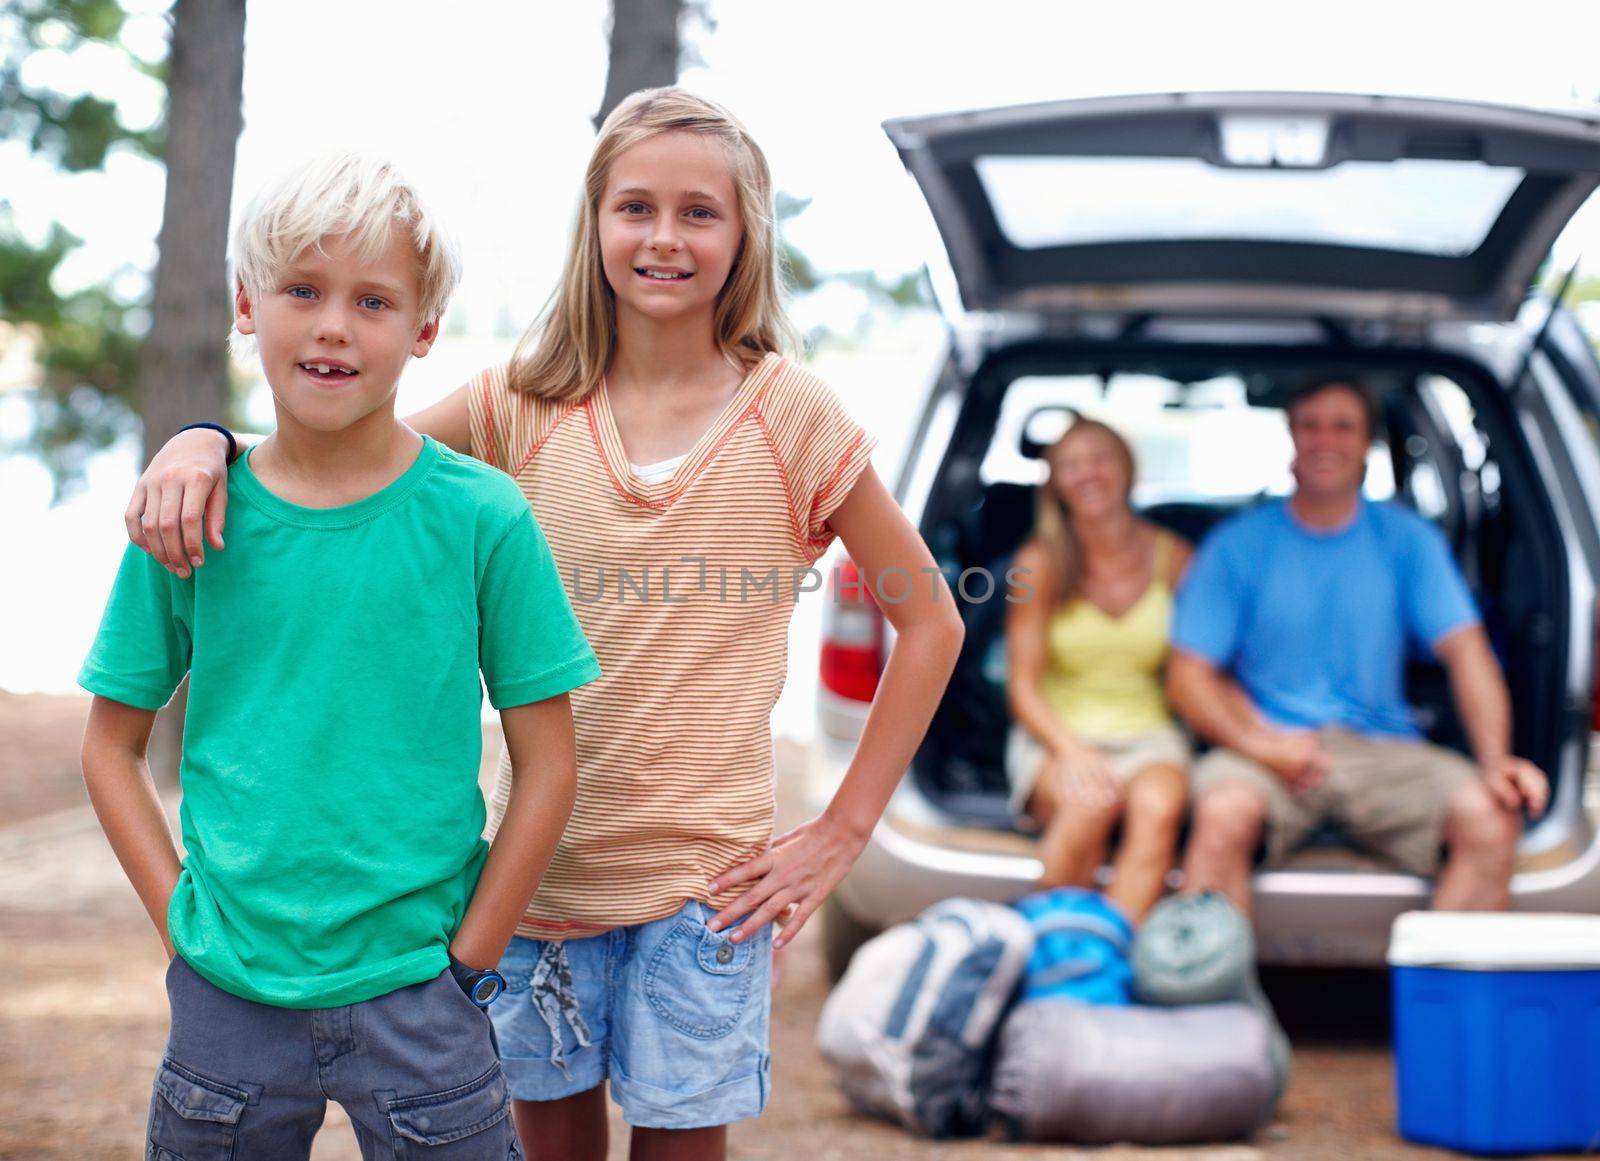 Family enjoying vacation. Portrait of young brother and sister enjoying their vacation with parents sitting in the back of a car